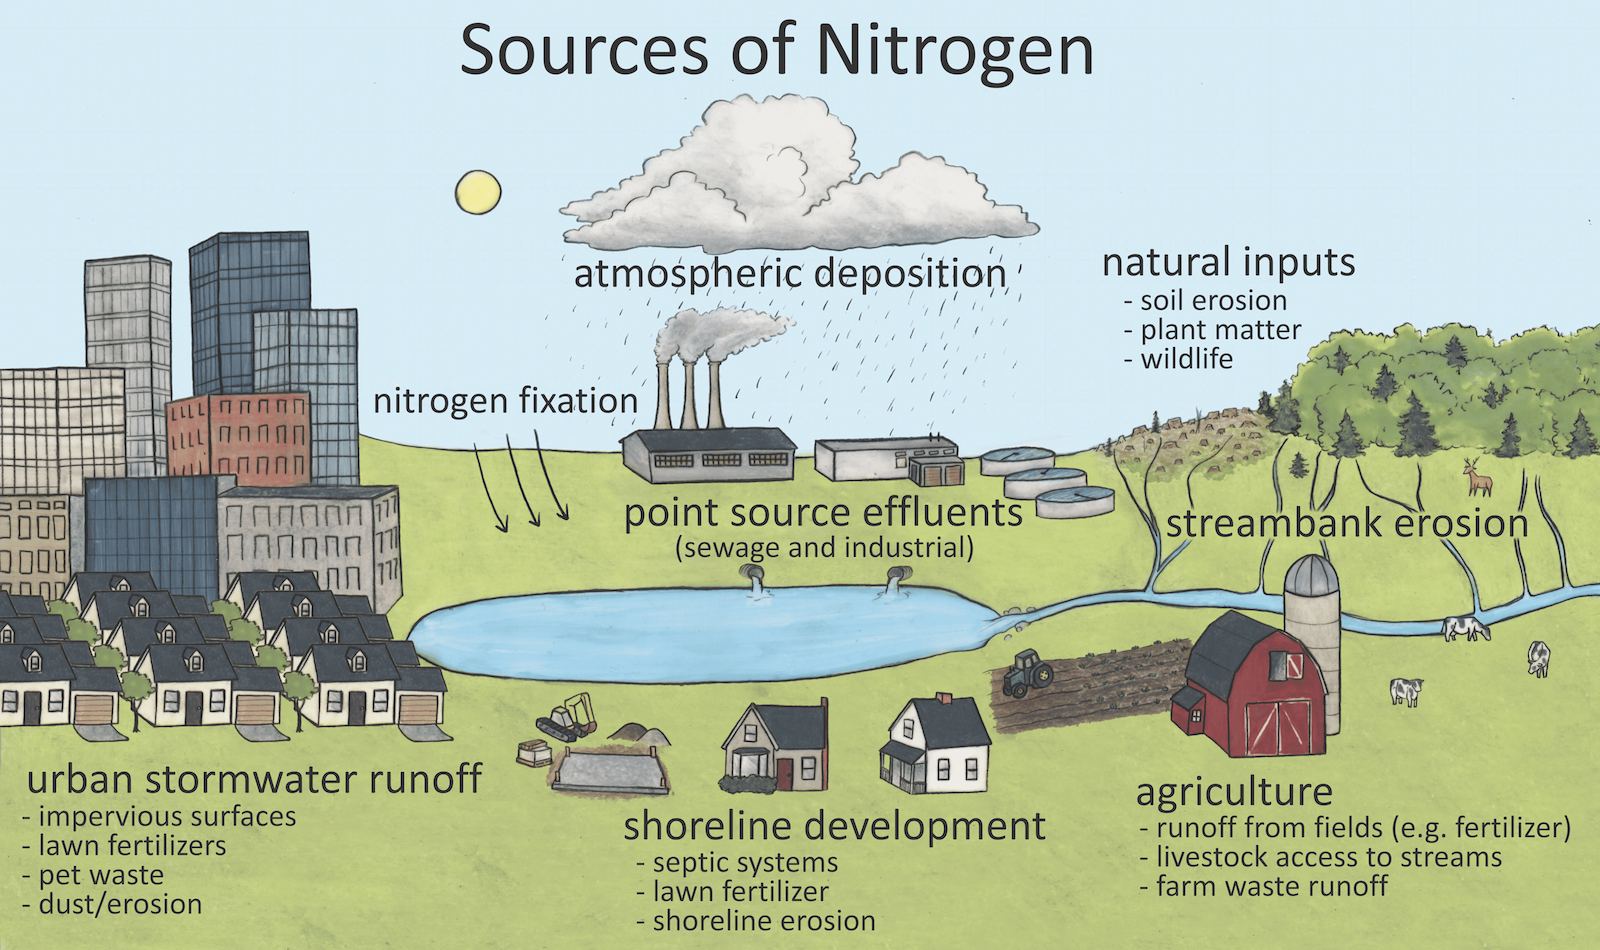 Hand drawn image illustrating nitrogen inputs to a pond from natural processes (illustrated by soil erosion from hillsides), agriculture (illustrated by a farm on the edge of the pond), shoreline development (illustrated by houses built on the edge of the pond), urban stormwater runoff (illustrated by a sketch of a city), wind erosion from exposed soils, and atmospheric deposition by rain.